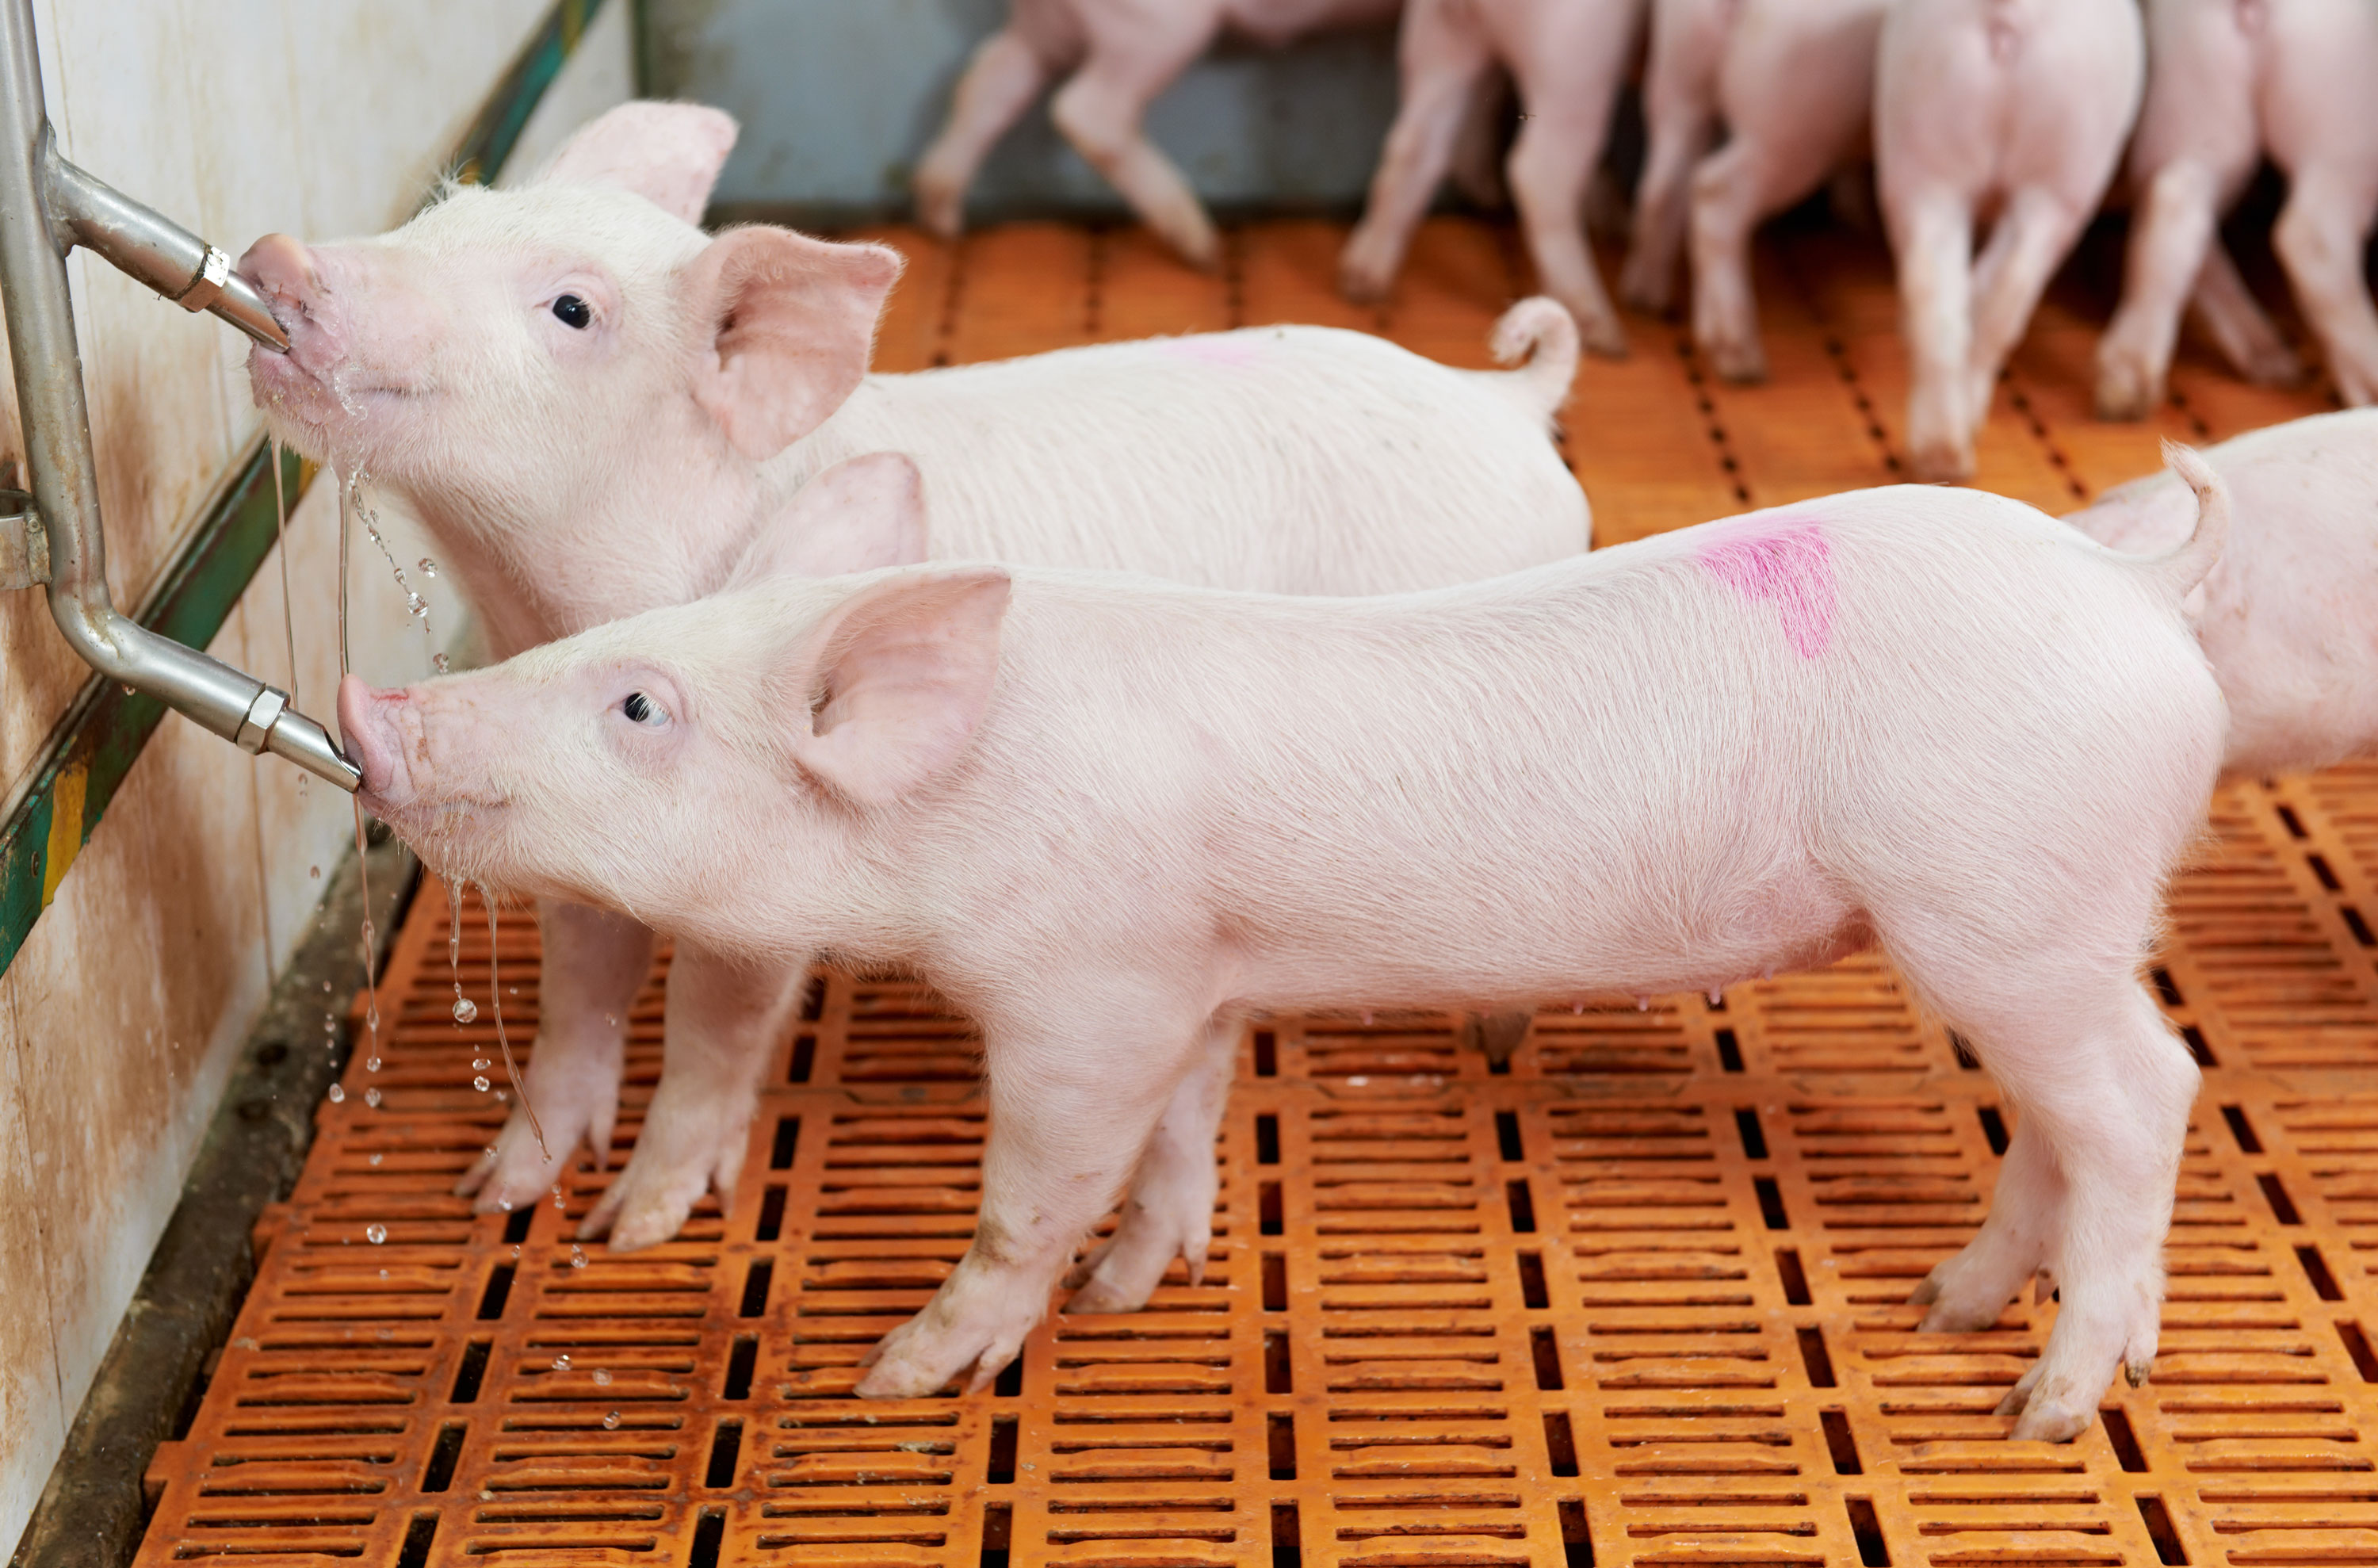 Two young swine drinking water in a wean-to-finish facility.